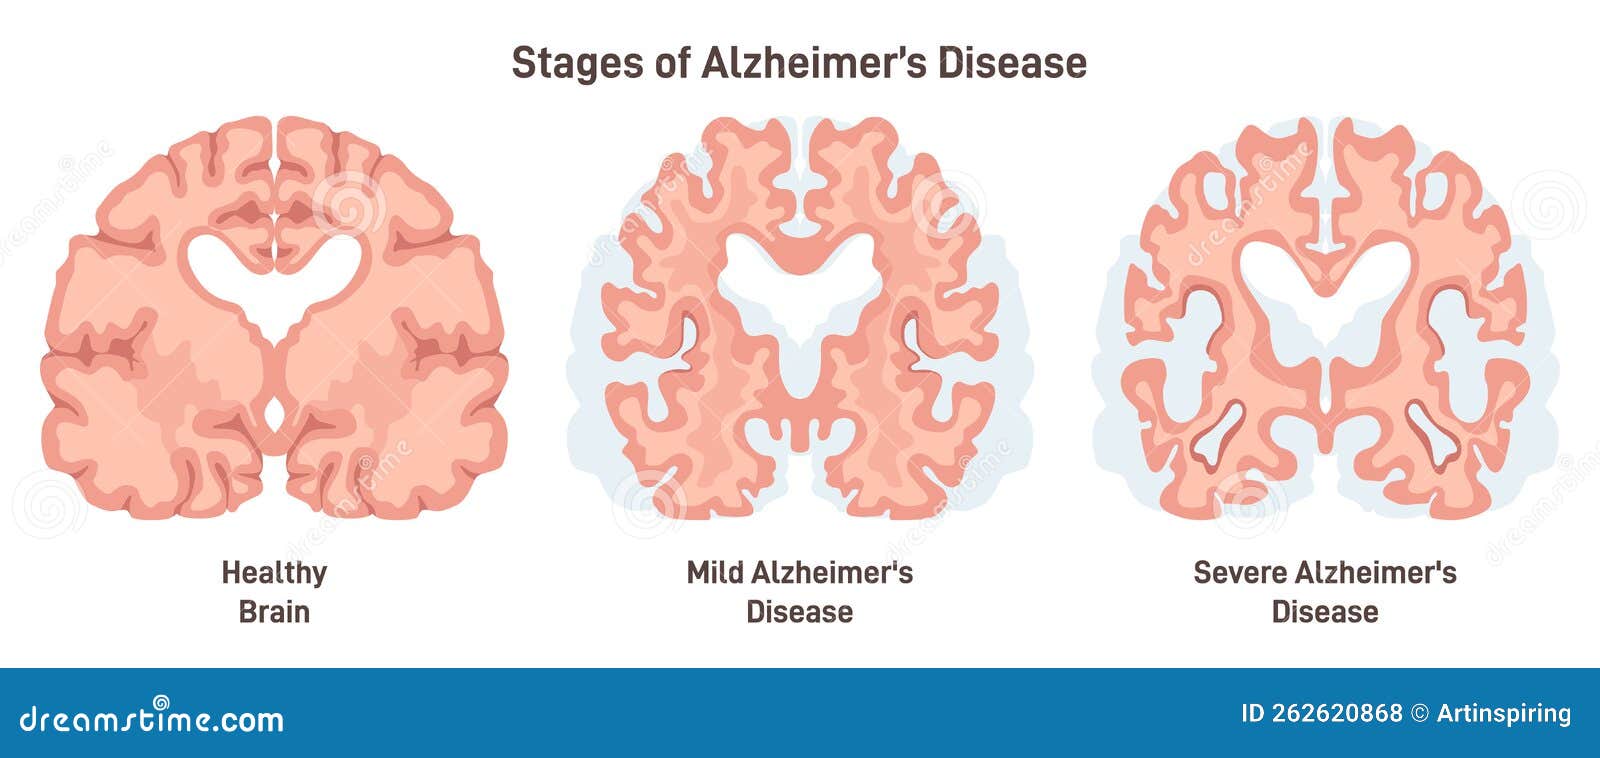 Alzheimer S Disease Stages. Human Brain Cross Section, Affected with ...